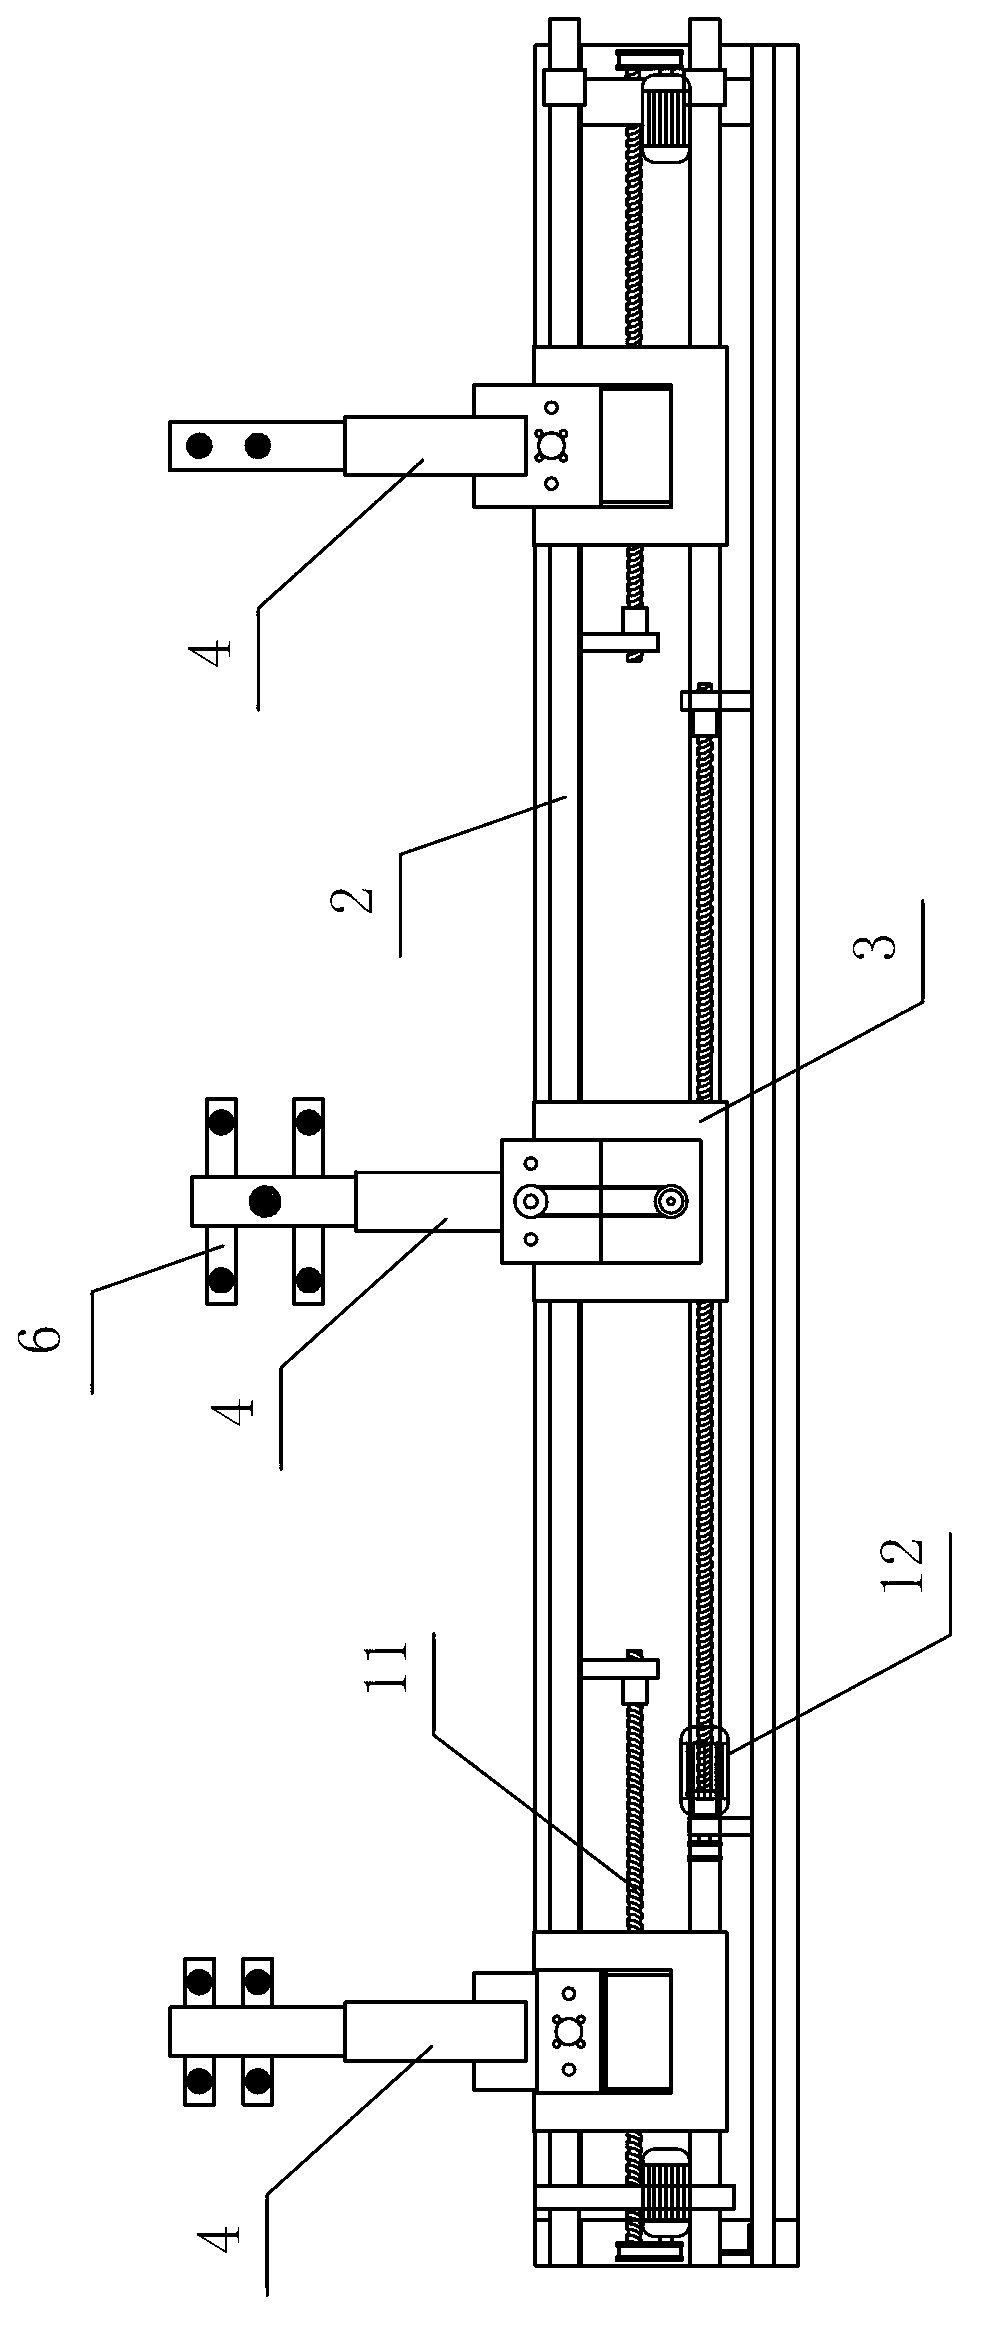 Multi-station automatic feeding device for sheet forming